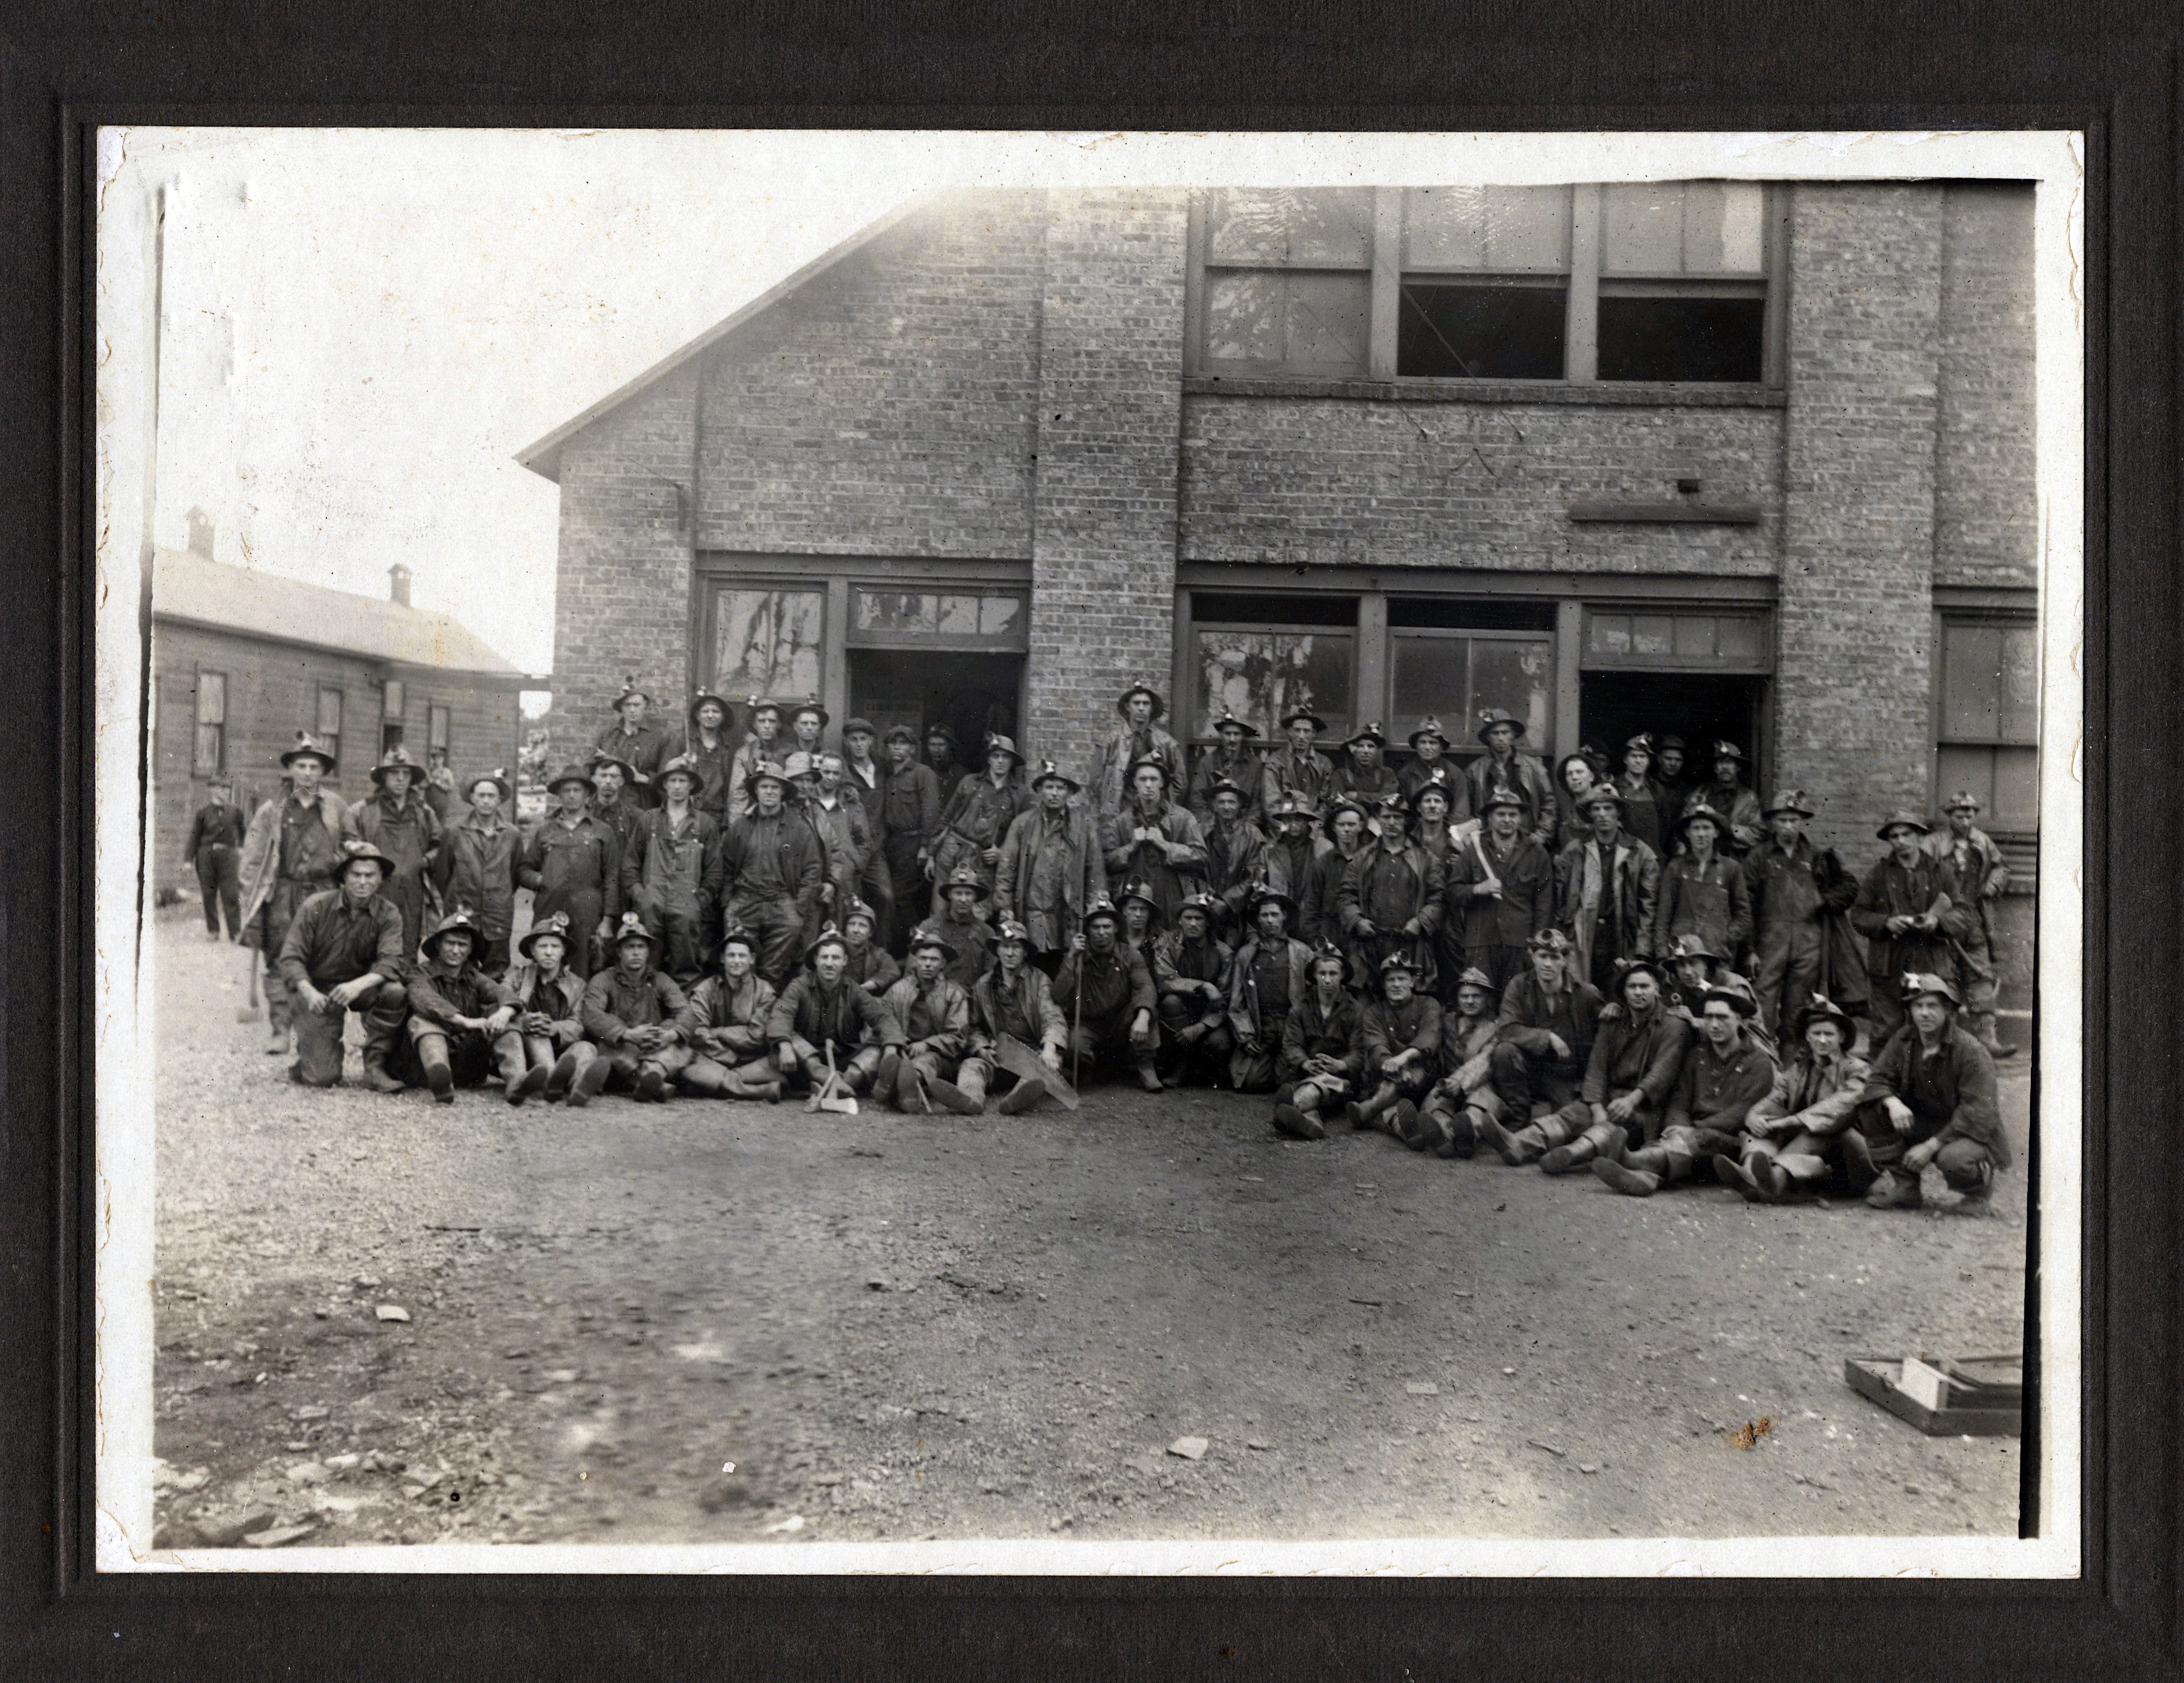 Men in mining gear in front of a brick building